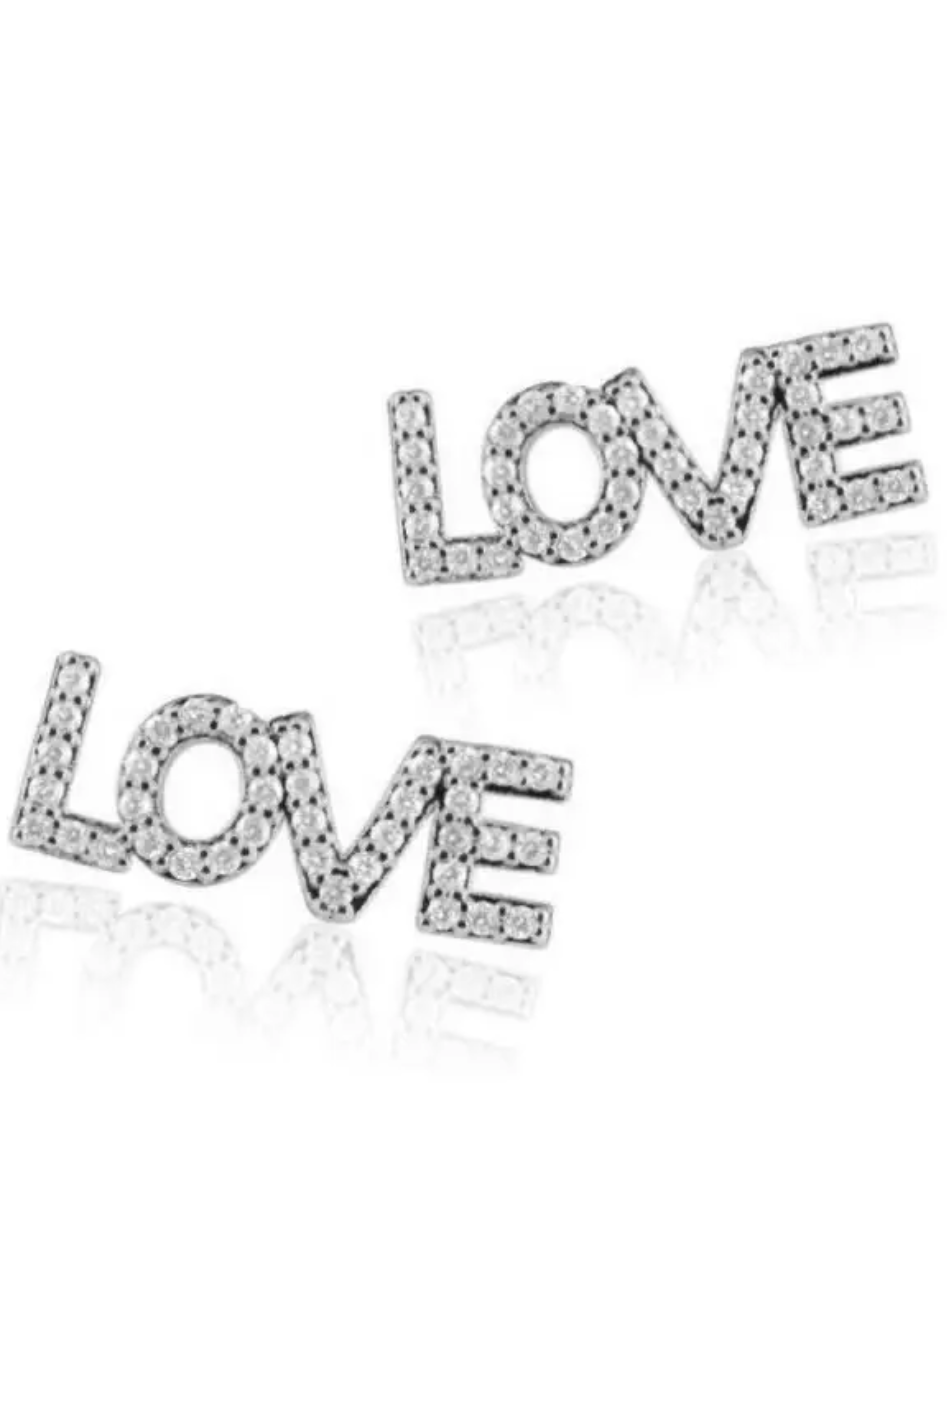 The Love Studs - Expressive Collective CO.